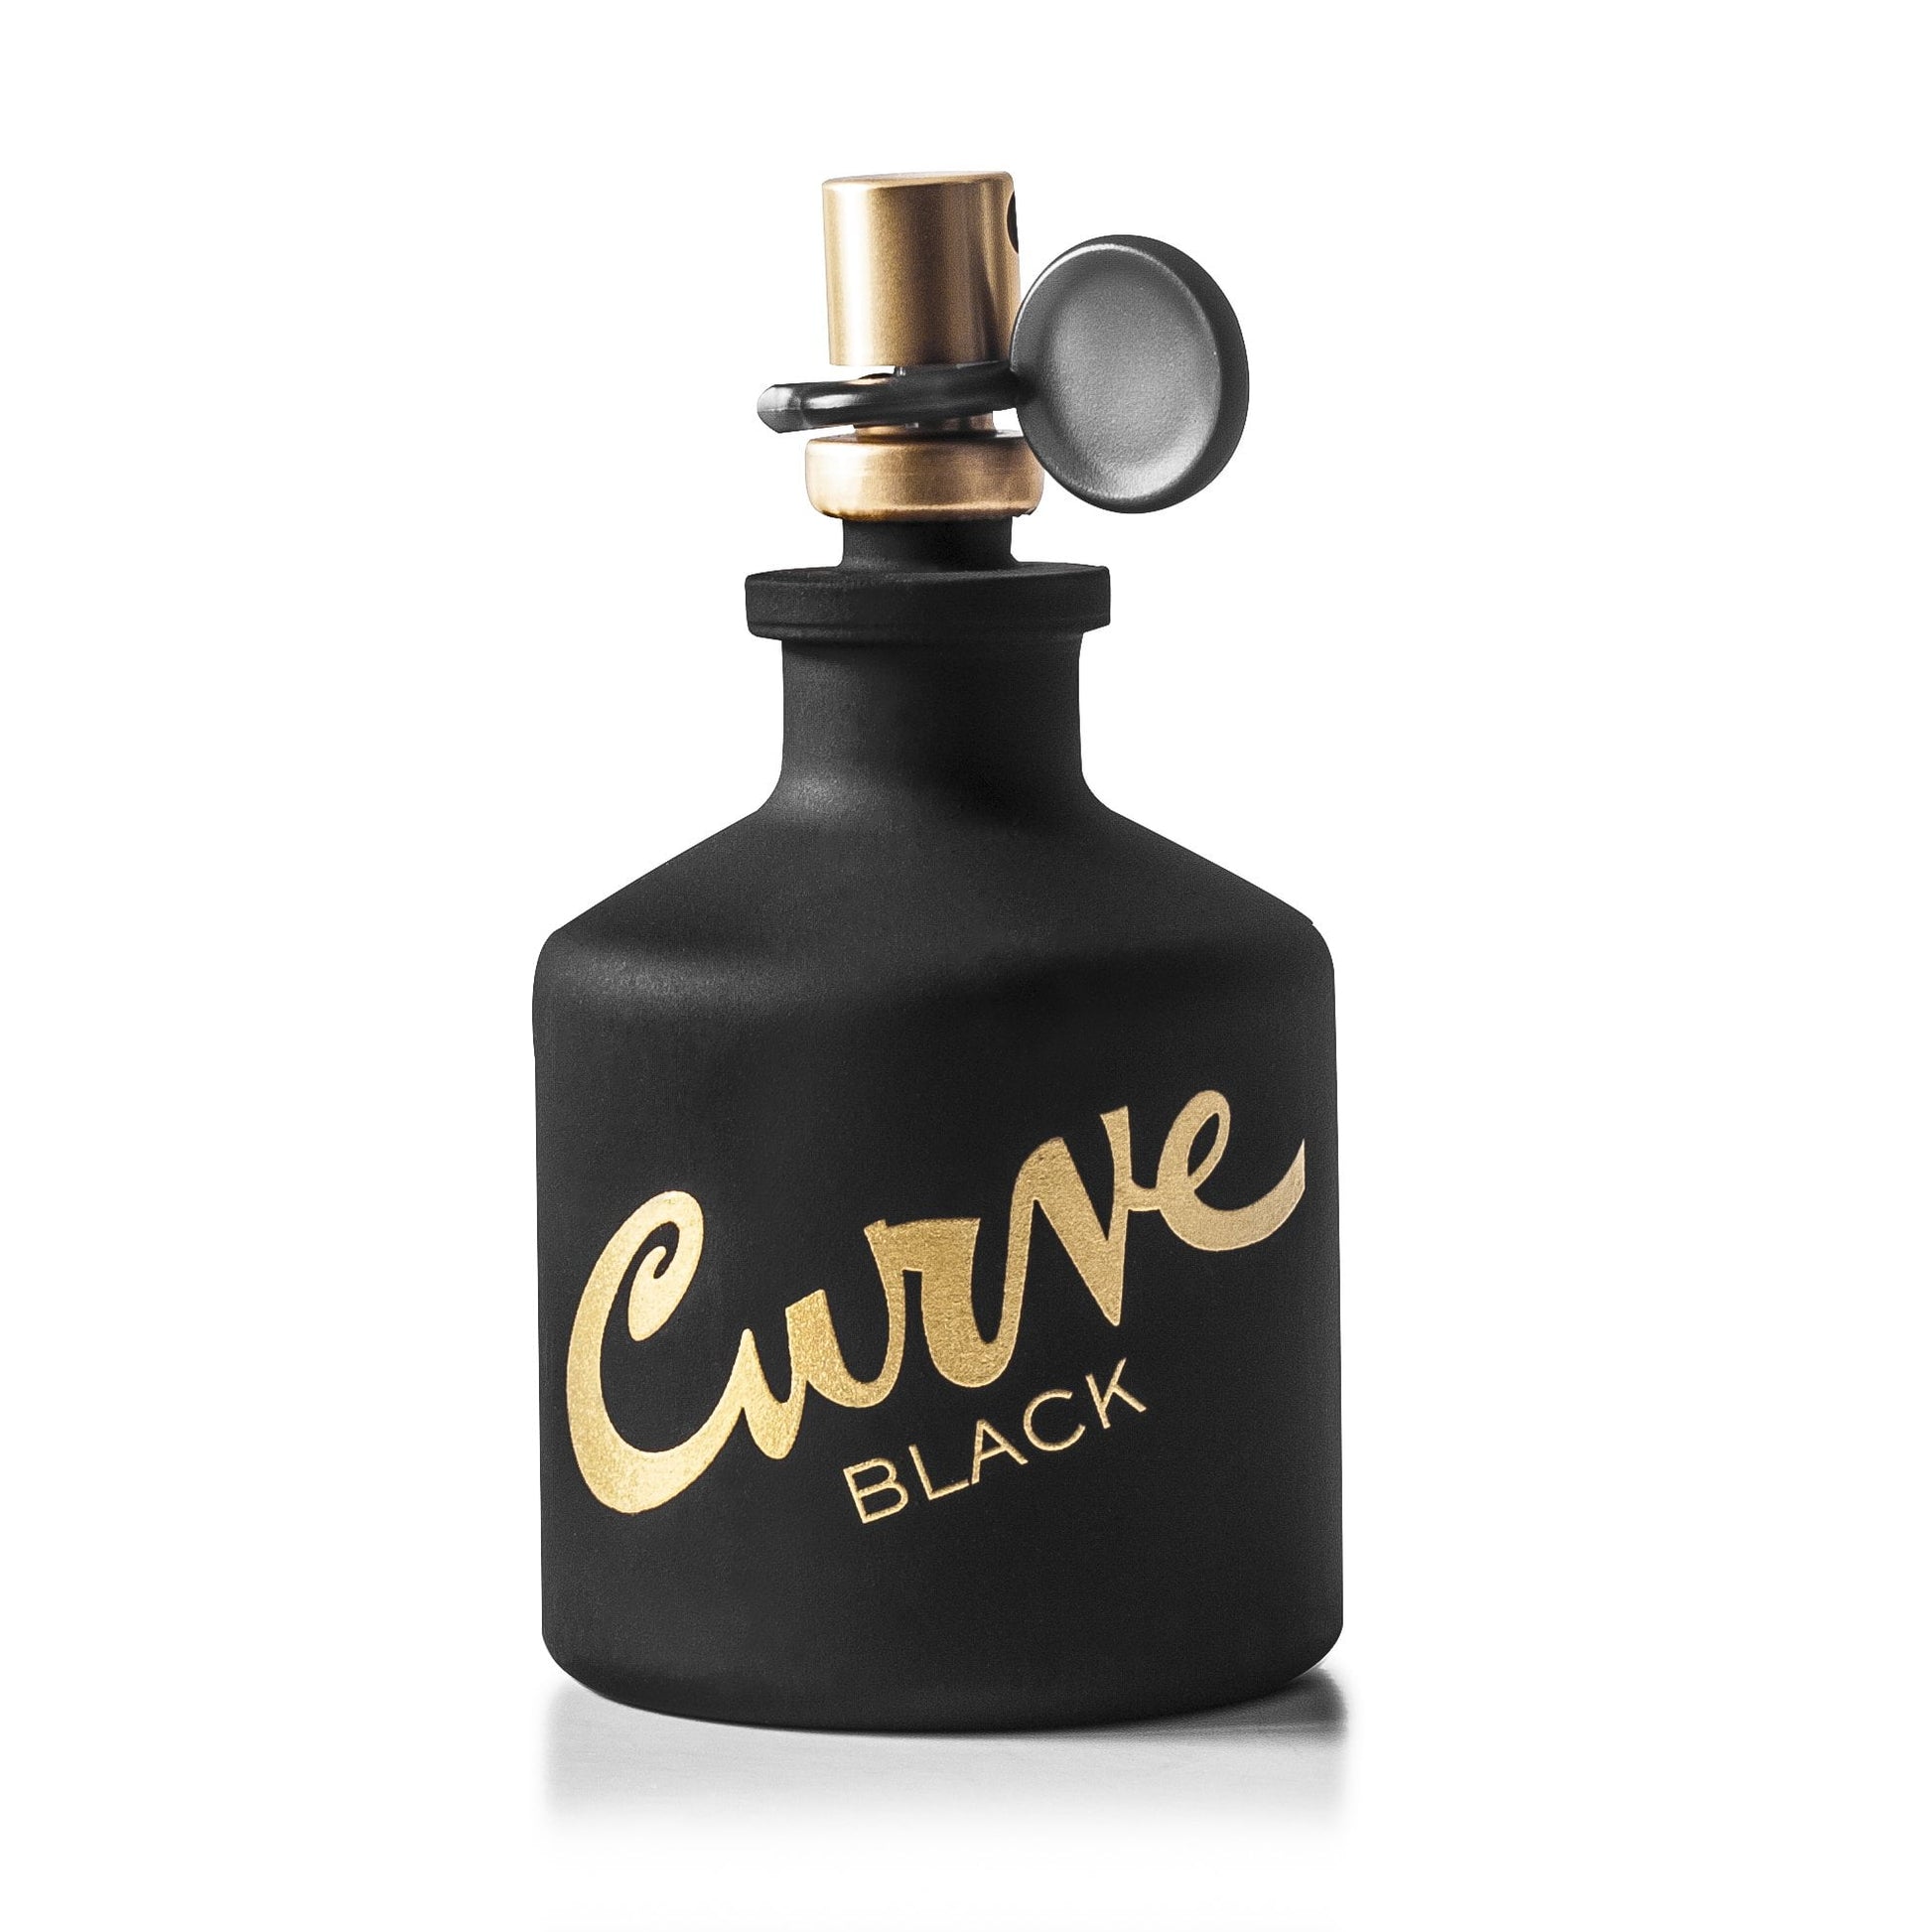 Curve Black Cologne Spray for Men by Claiborne, Product image 2